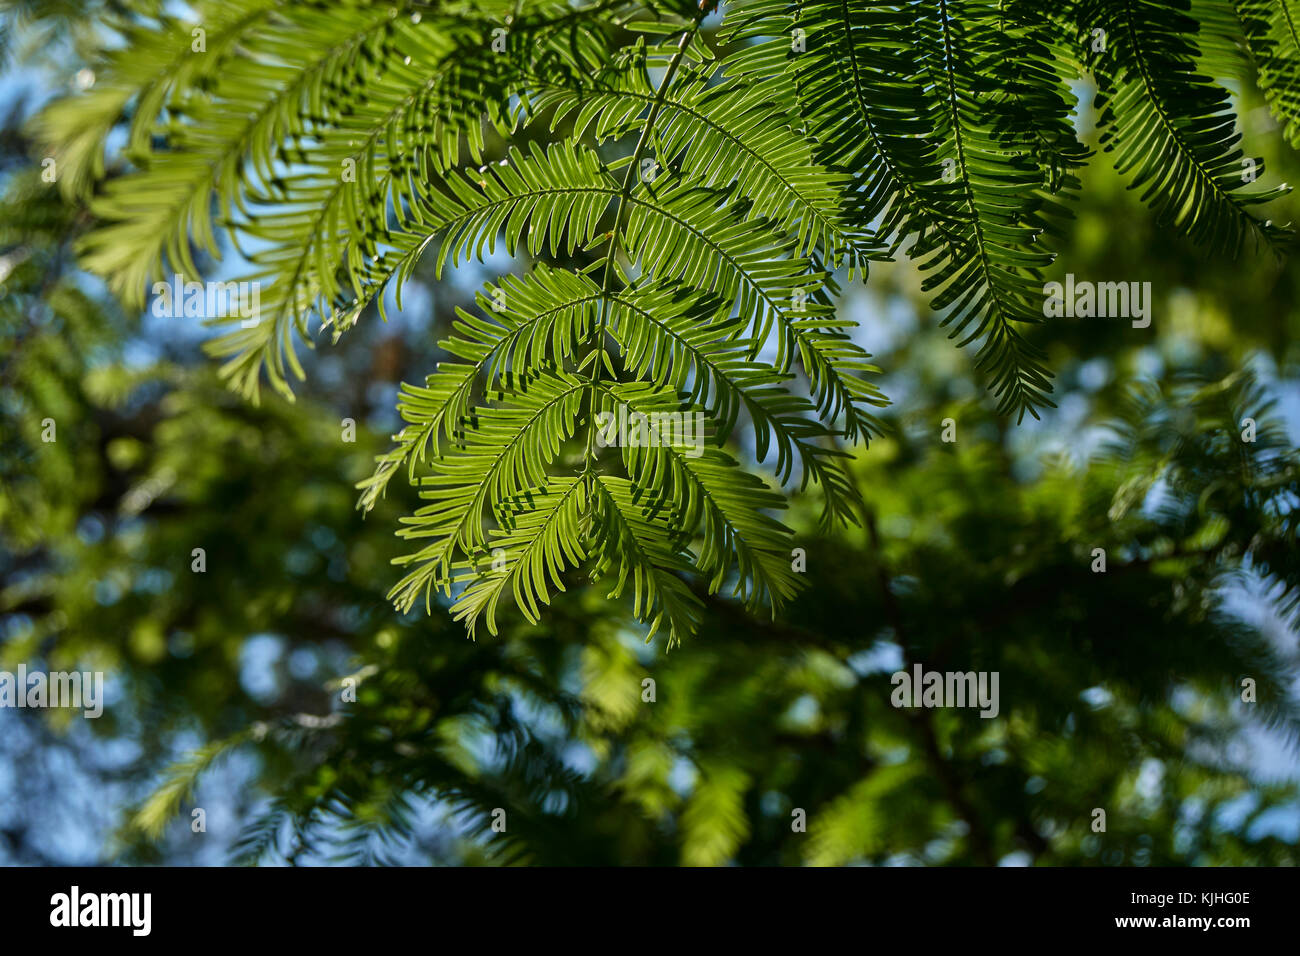 close-up of branches, looking up through evergreen leaves with blue sky in background Stock Photo